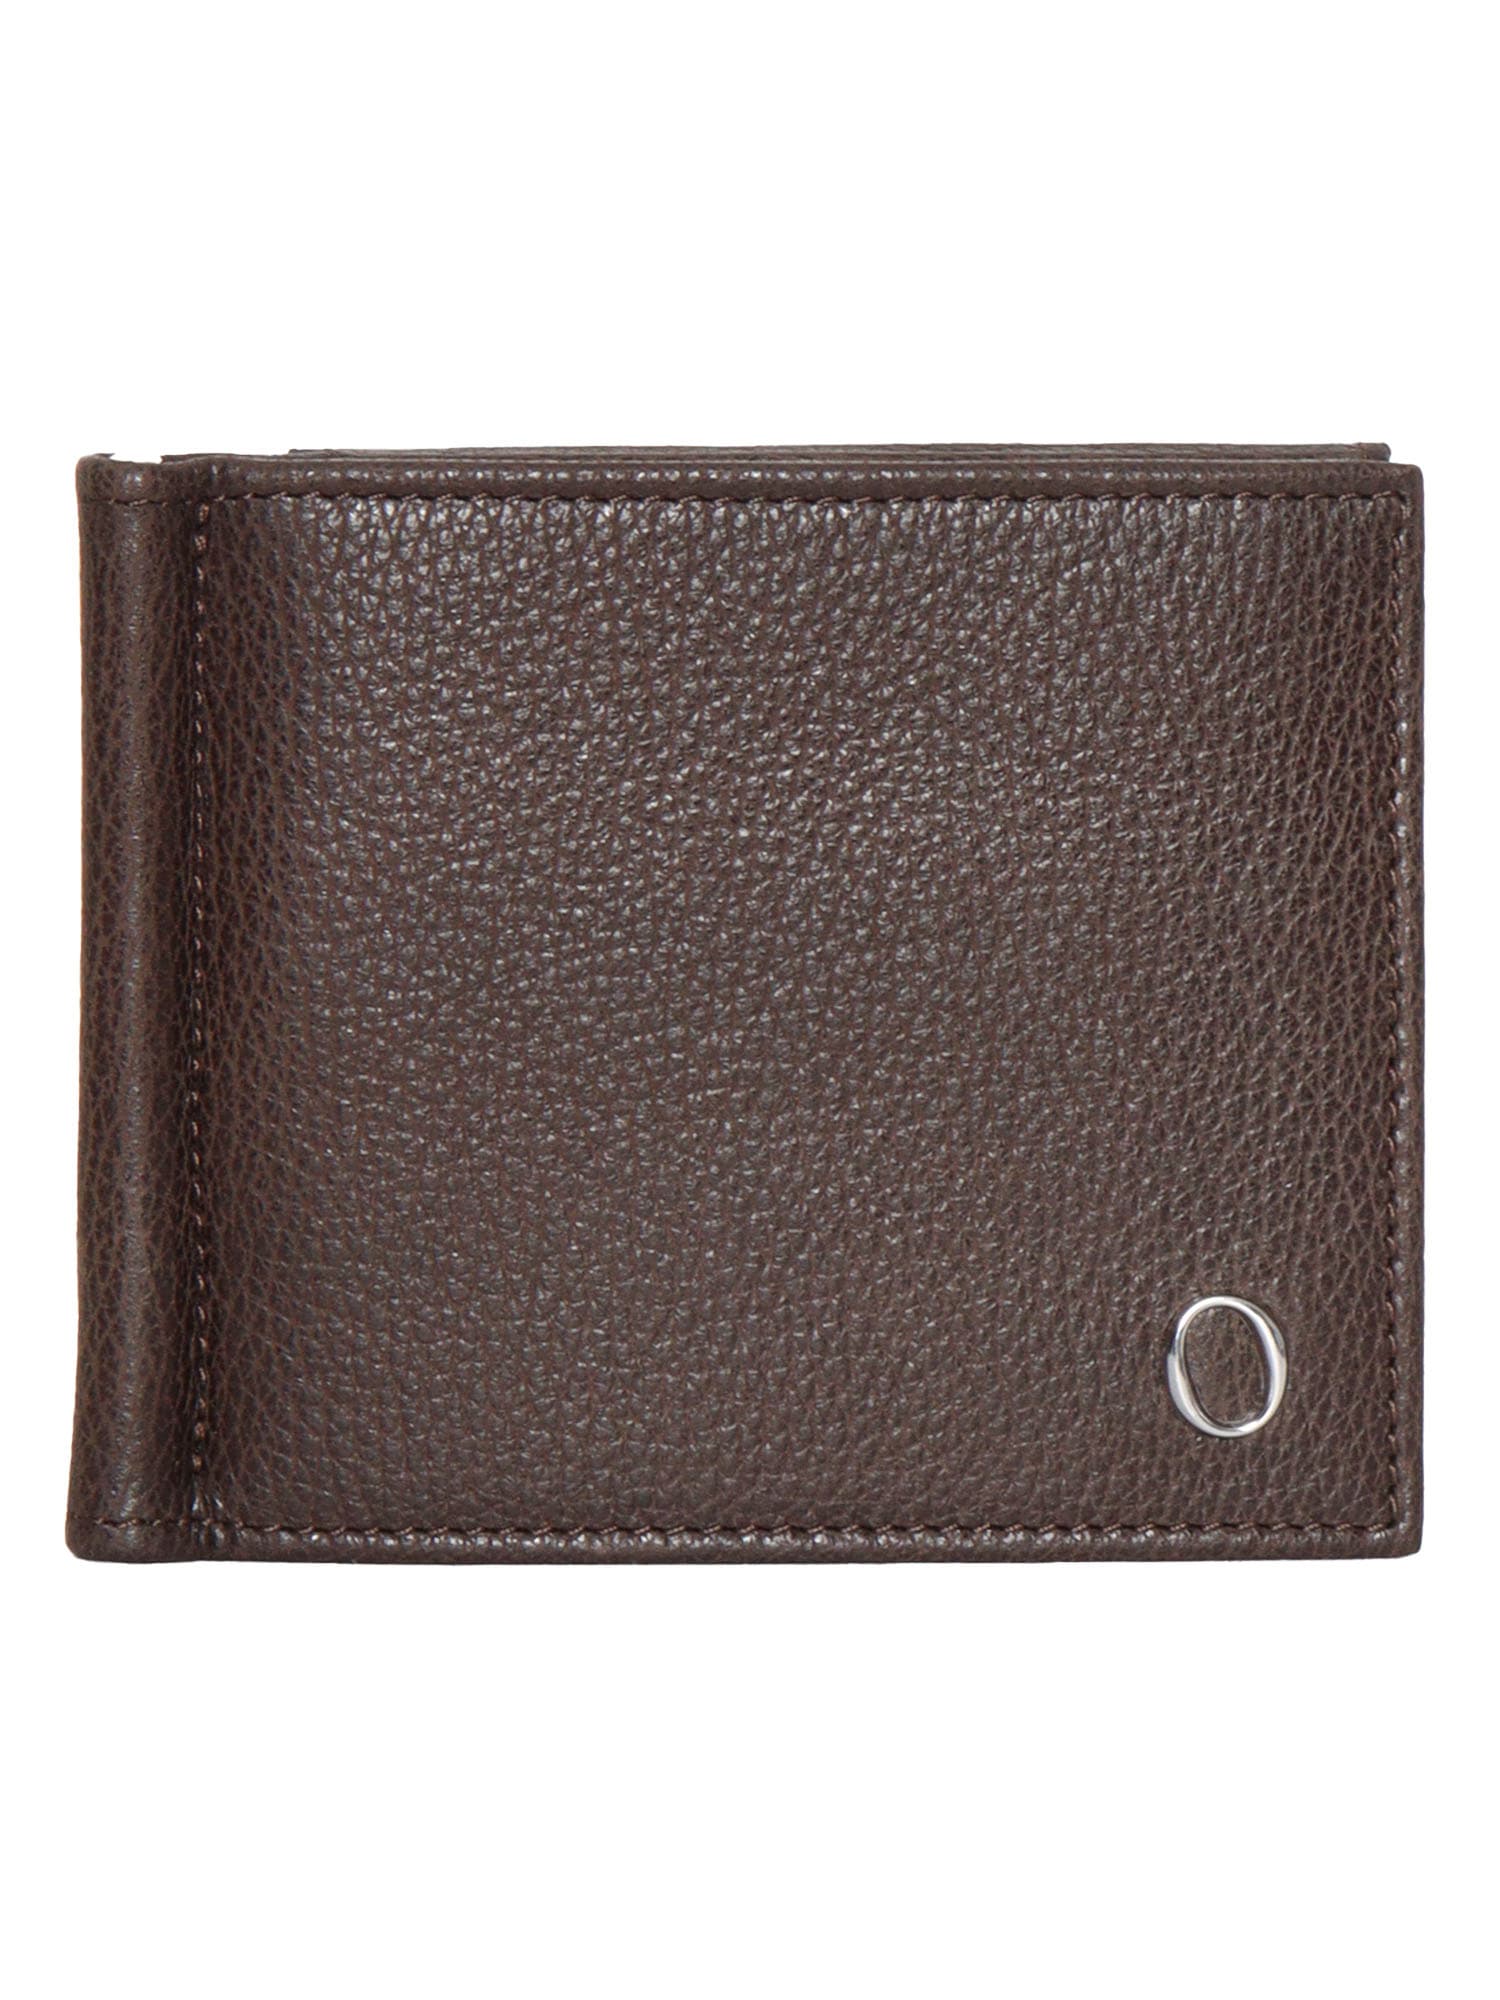 Orciani Micron Wallet In Brown